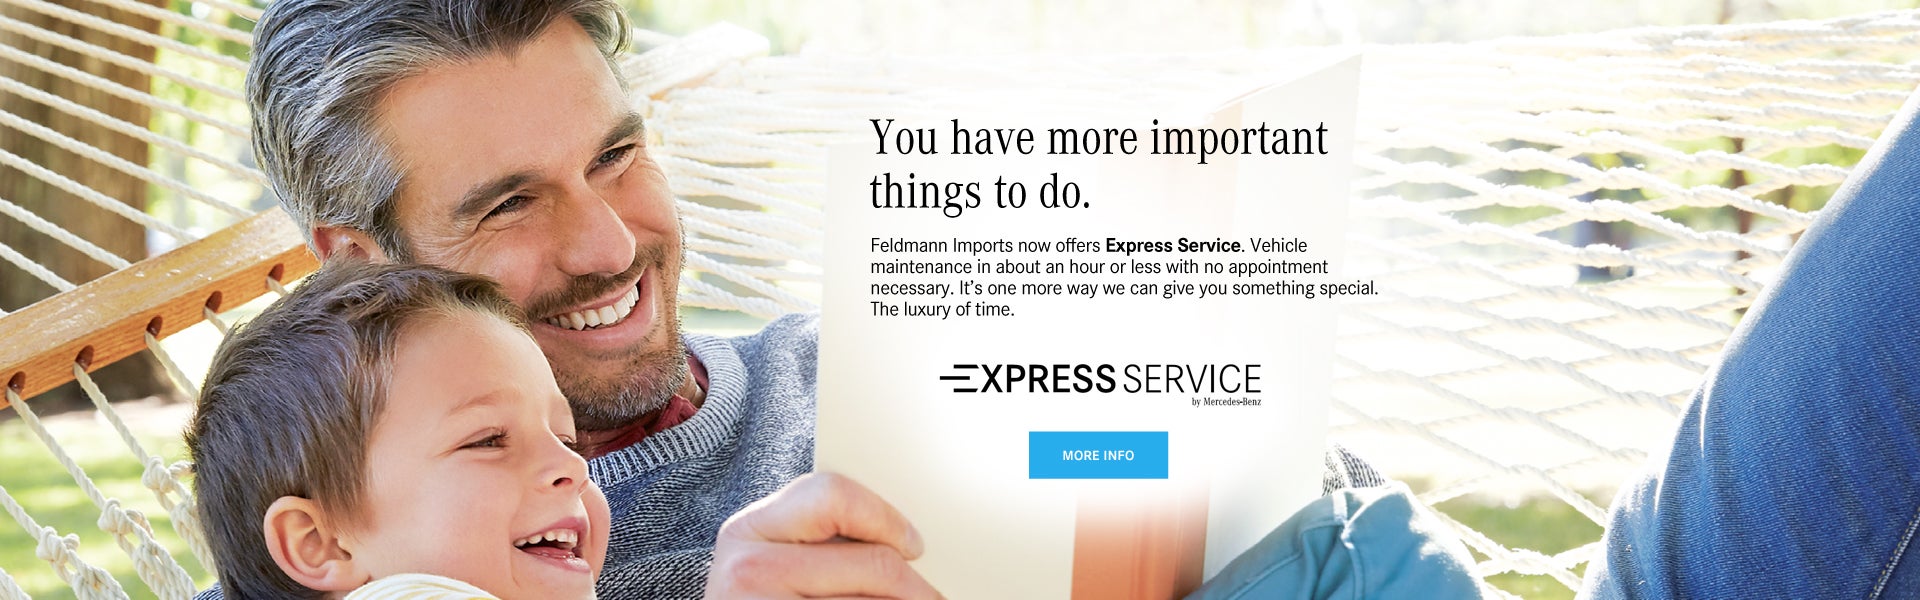 Mercedes-Benz Express Service while you wait